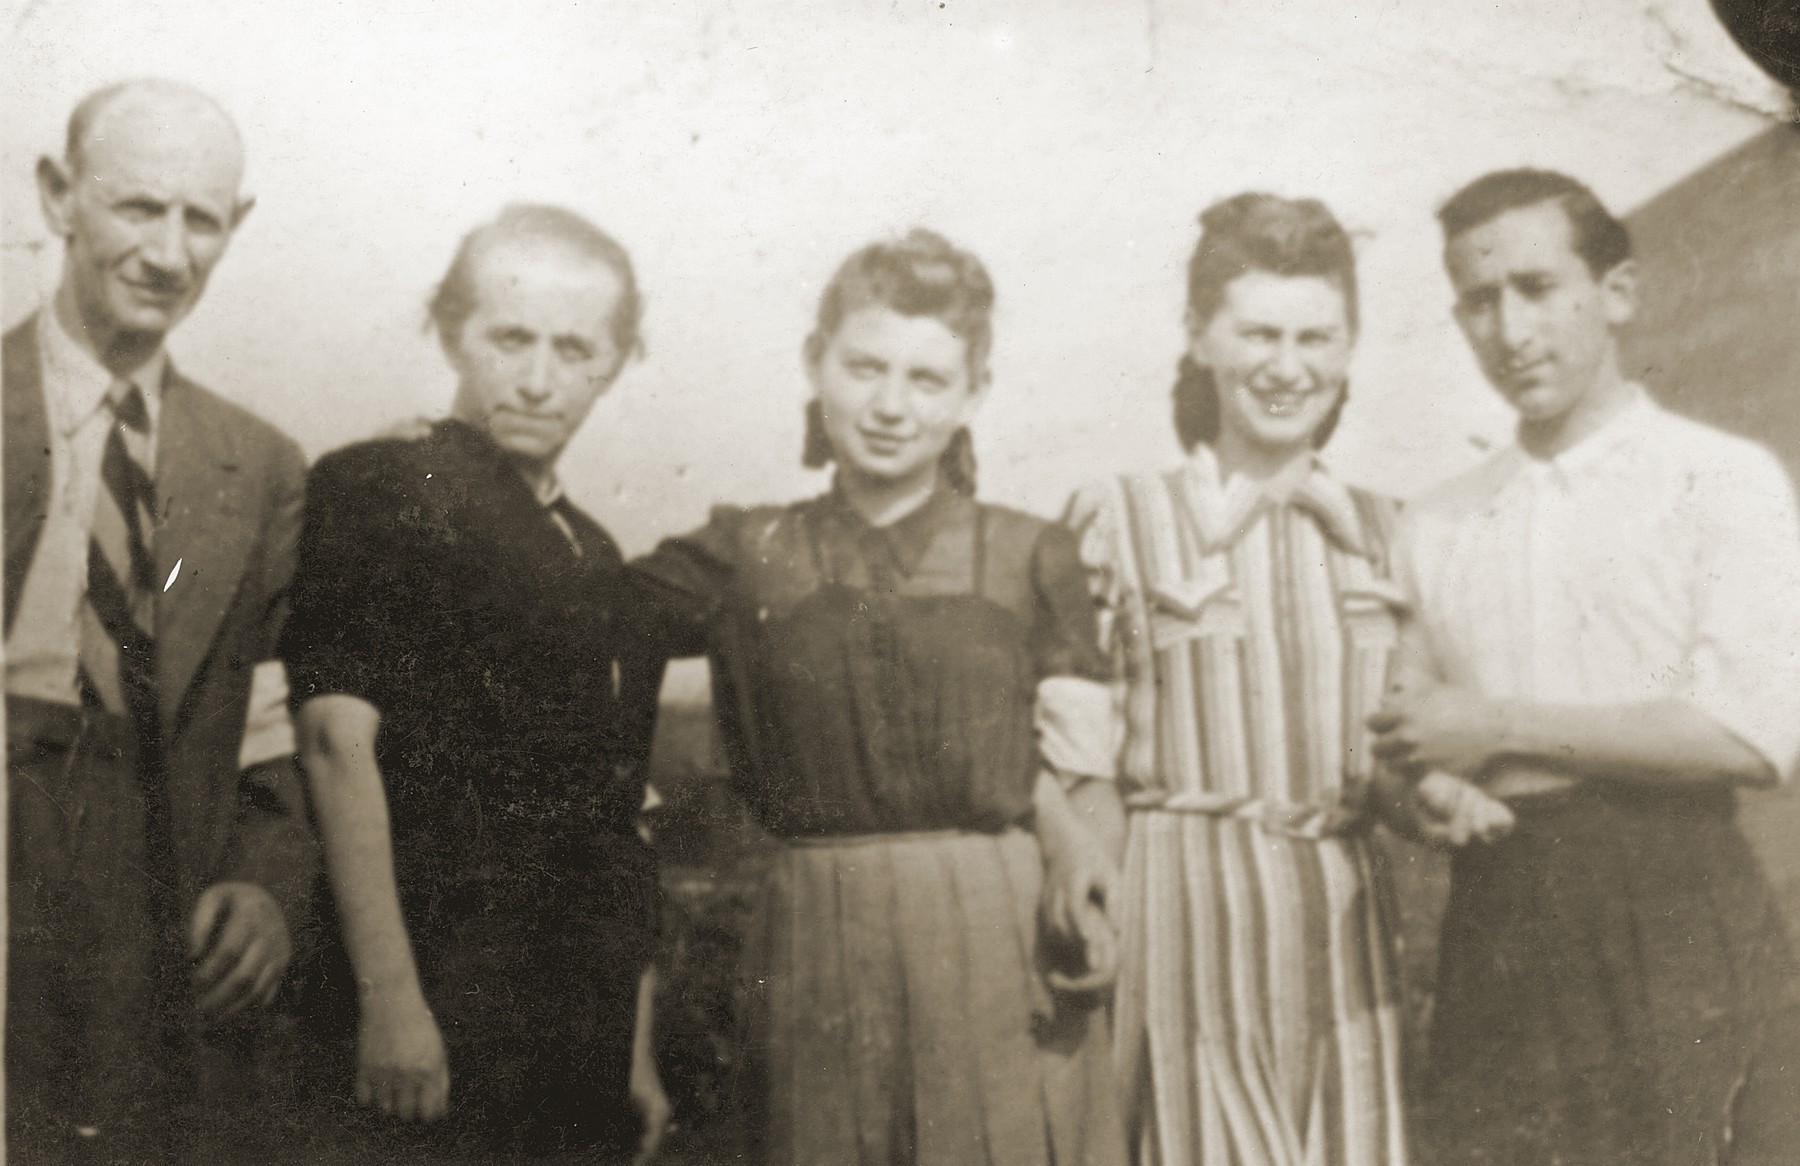 Szmulek Lustiger poses with his wife and her family in the Bedzin ghetto.

From right to left are Szmulek Lustiger, Charlotte Eisner Lustiger, Charlotte's sister, Gitl Eisner and Salomon Eisner.